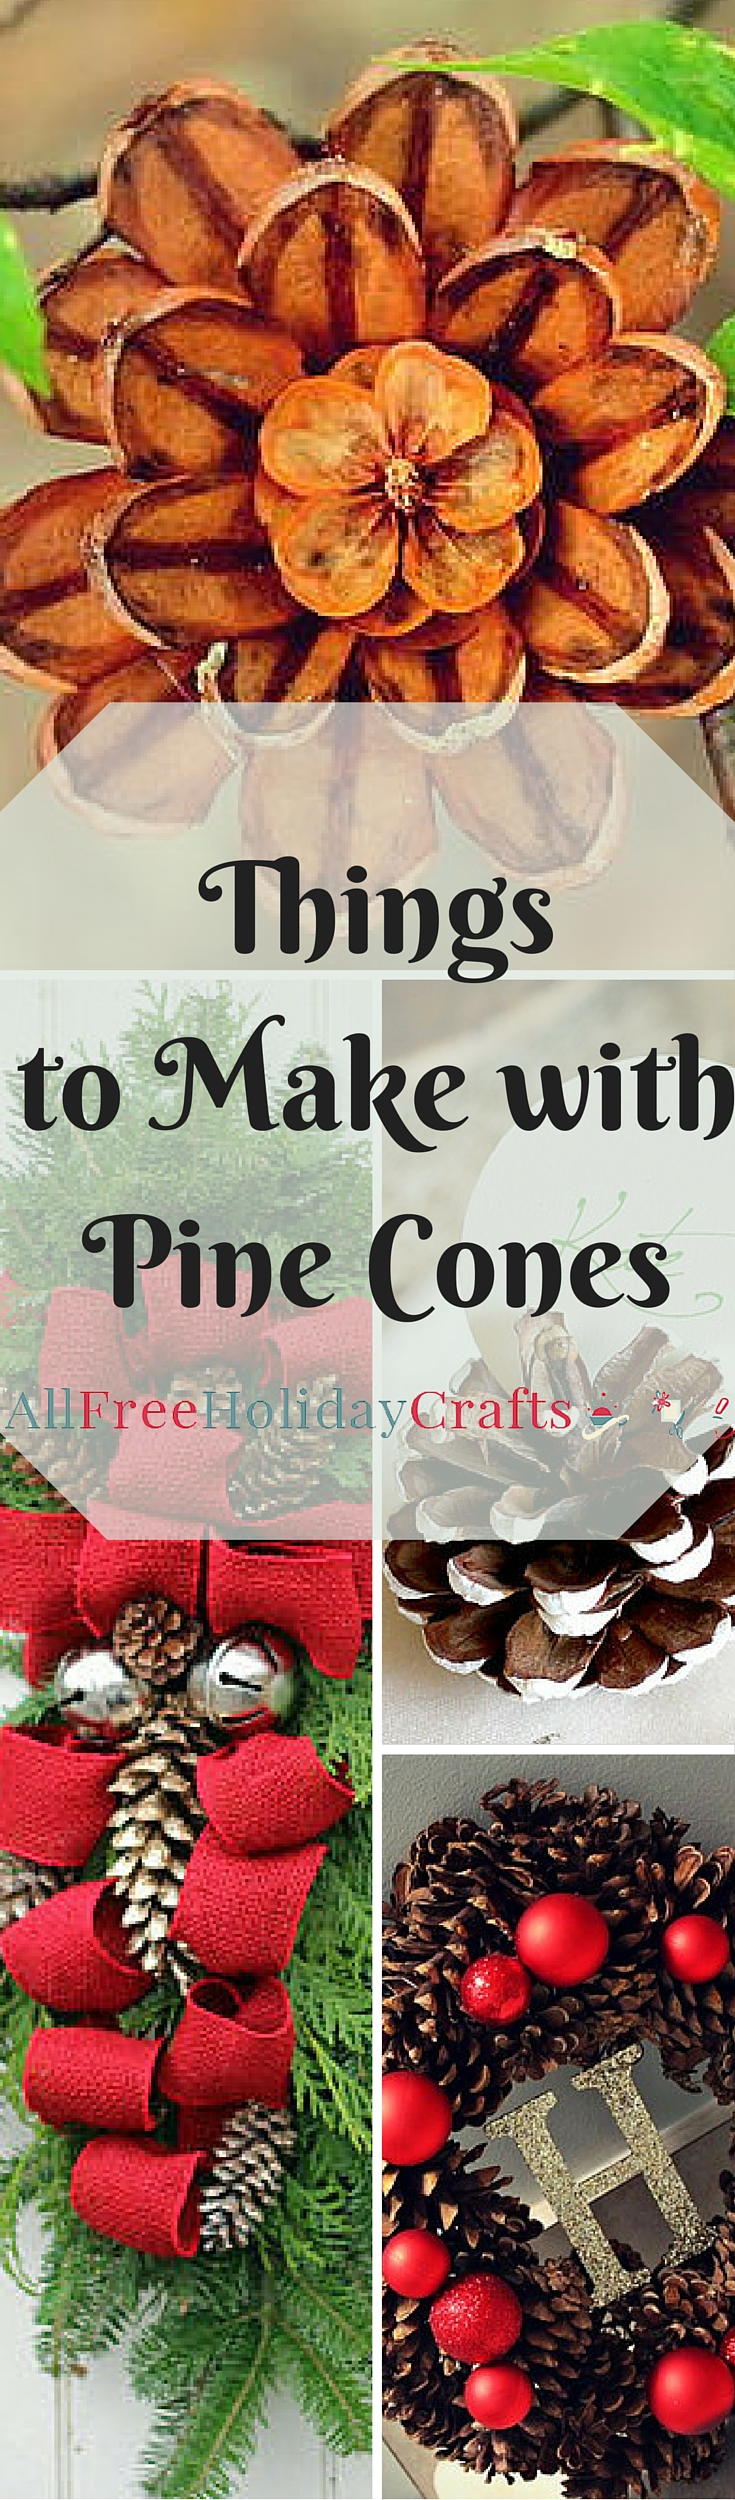 Nature Crafts: 35+ Things to Make With Pine Cones